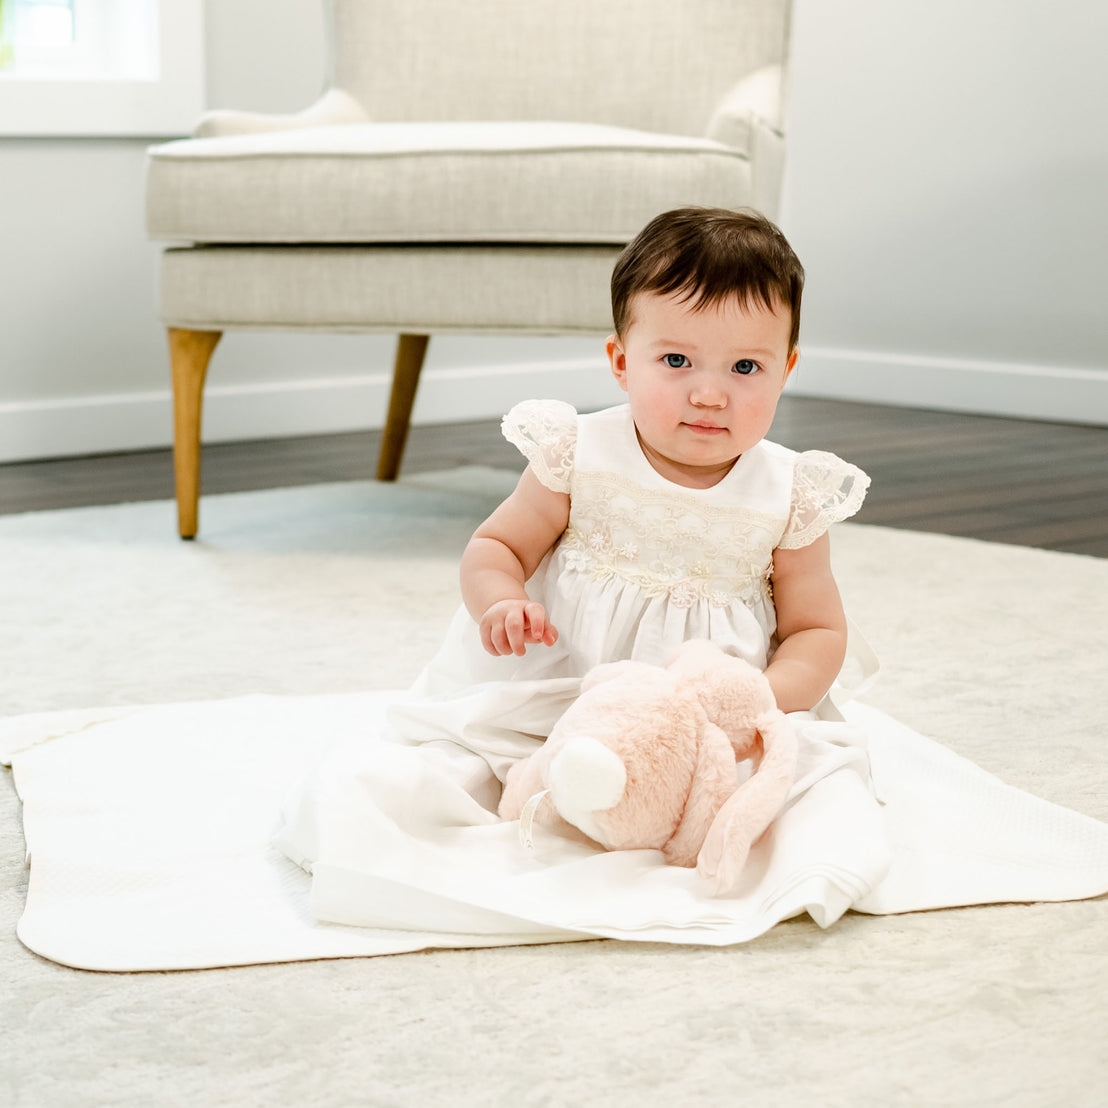 A baby with dark hair sits on the Jessica Personalized Blanket, holding a plush pink bunny, dressed in the Jessica Linen Gown, with a light grey armchair and white walls in the background.